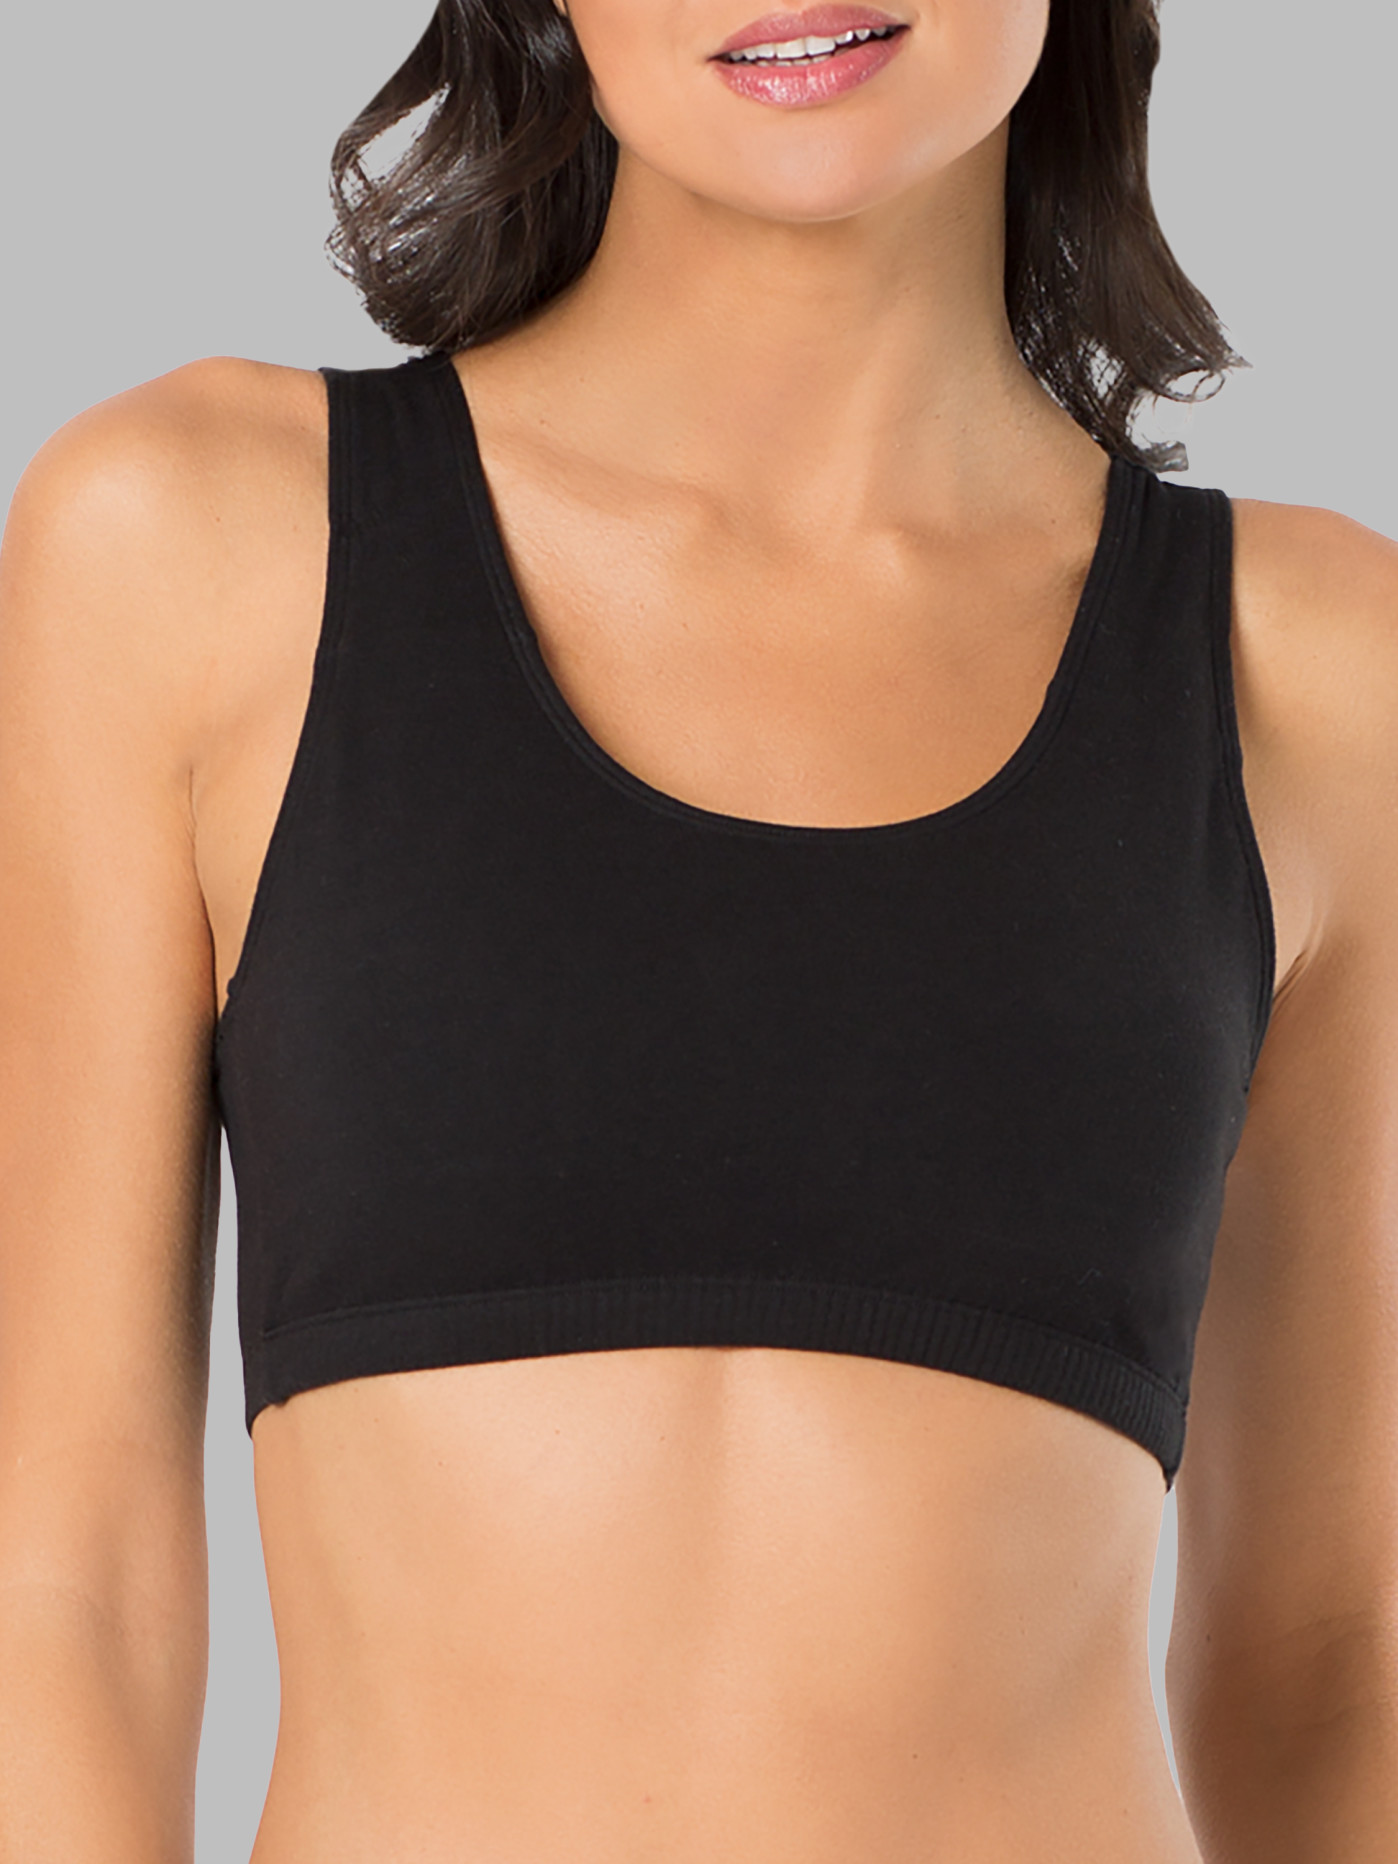 Buy Domain names Quickly - FITTIN Racerback Sports Bras for Women